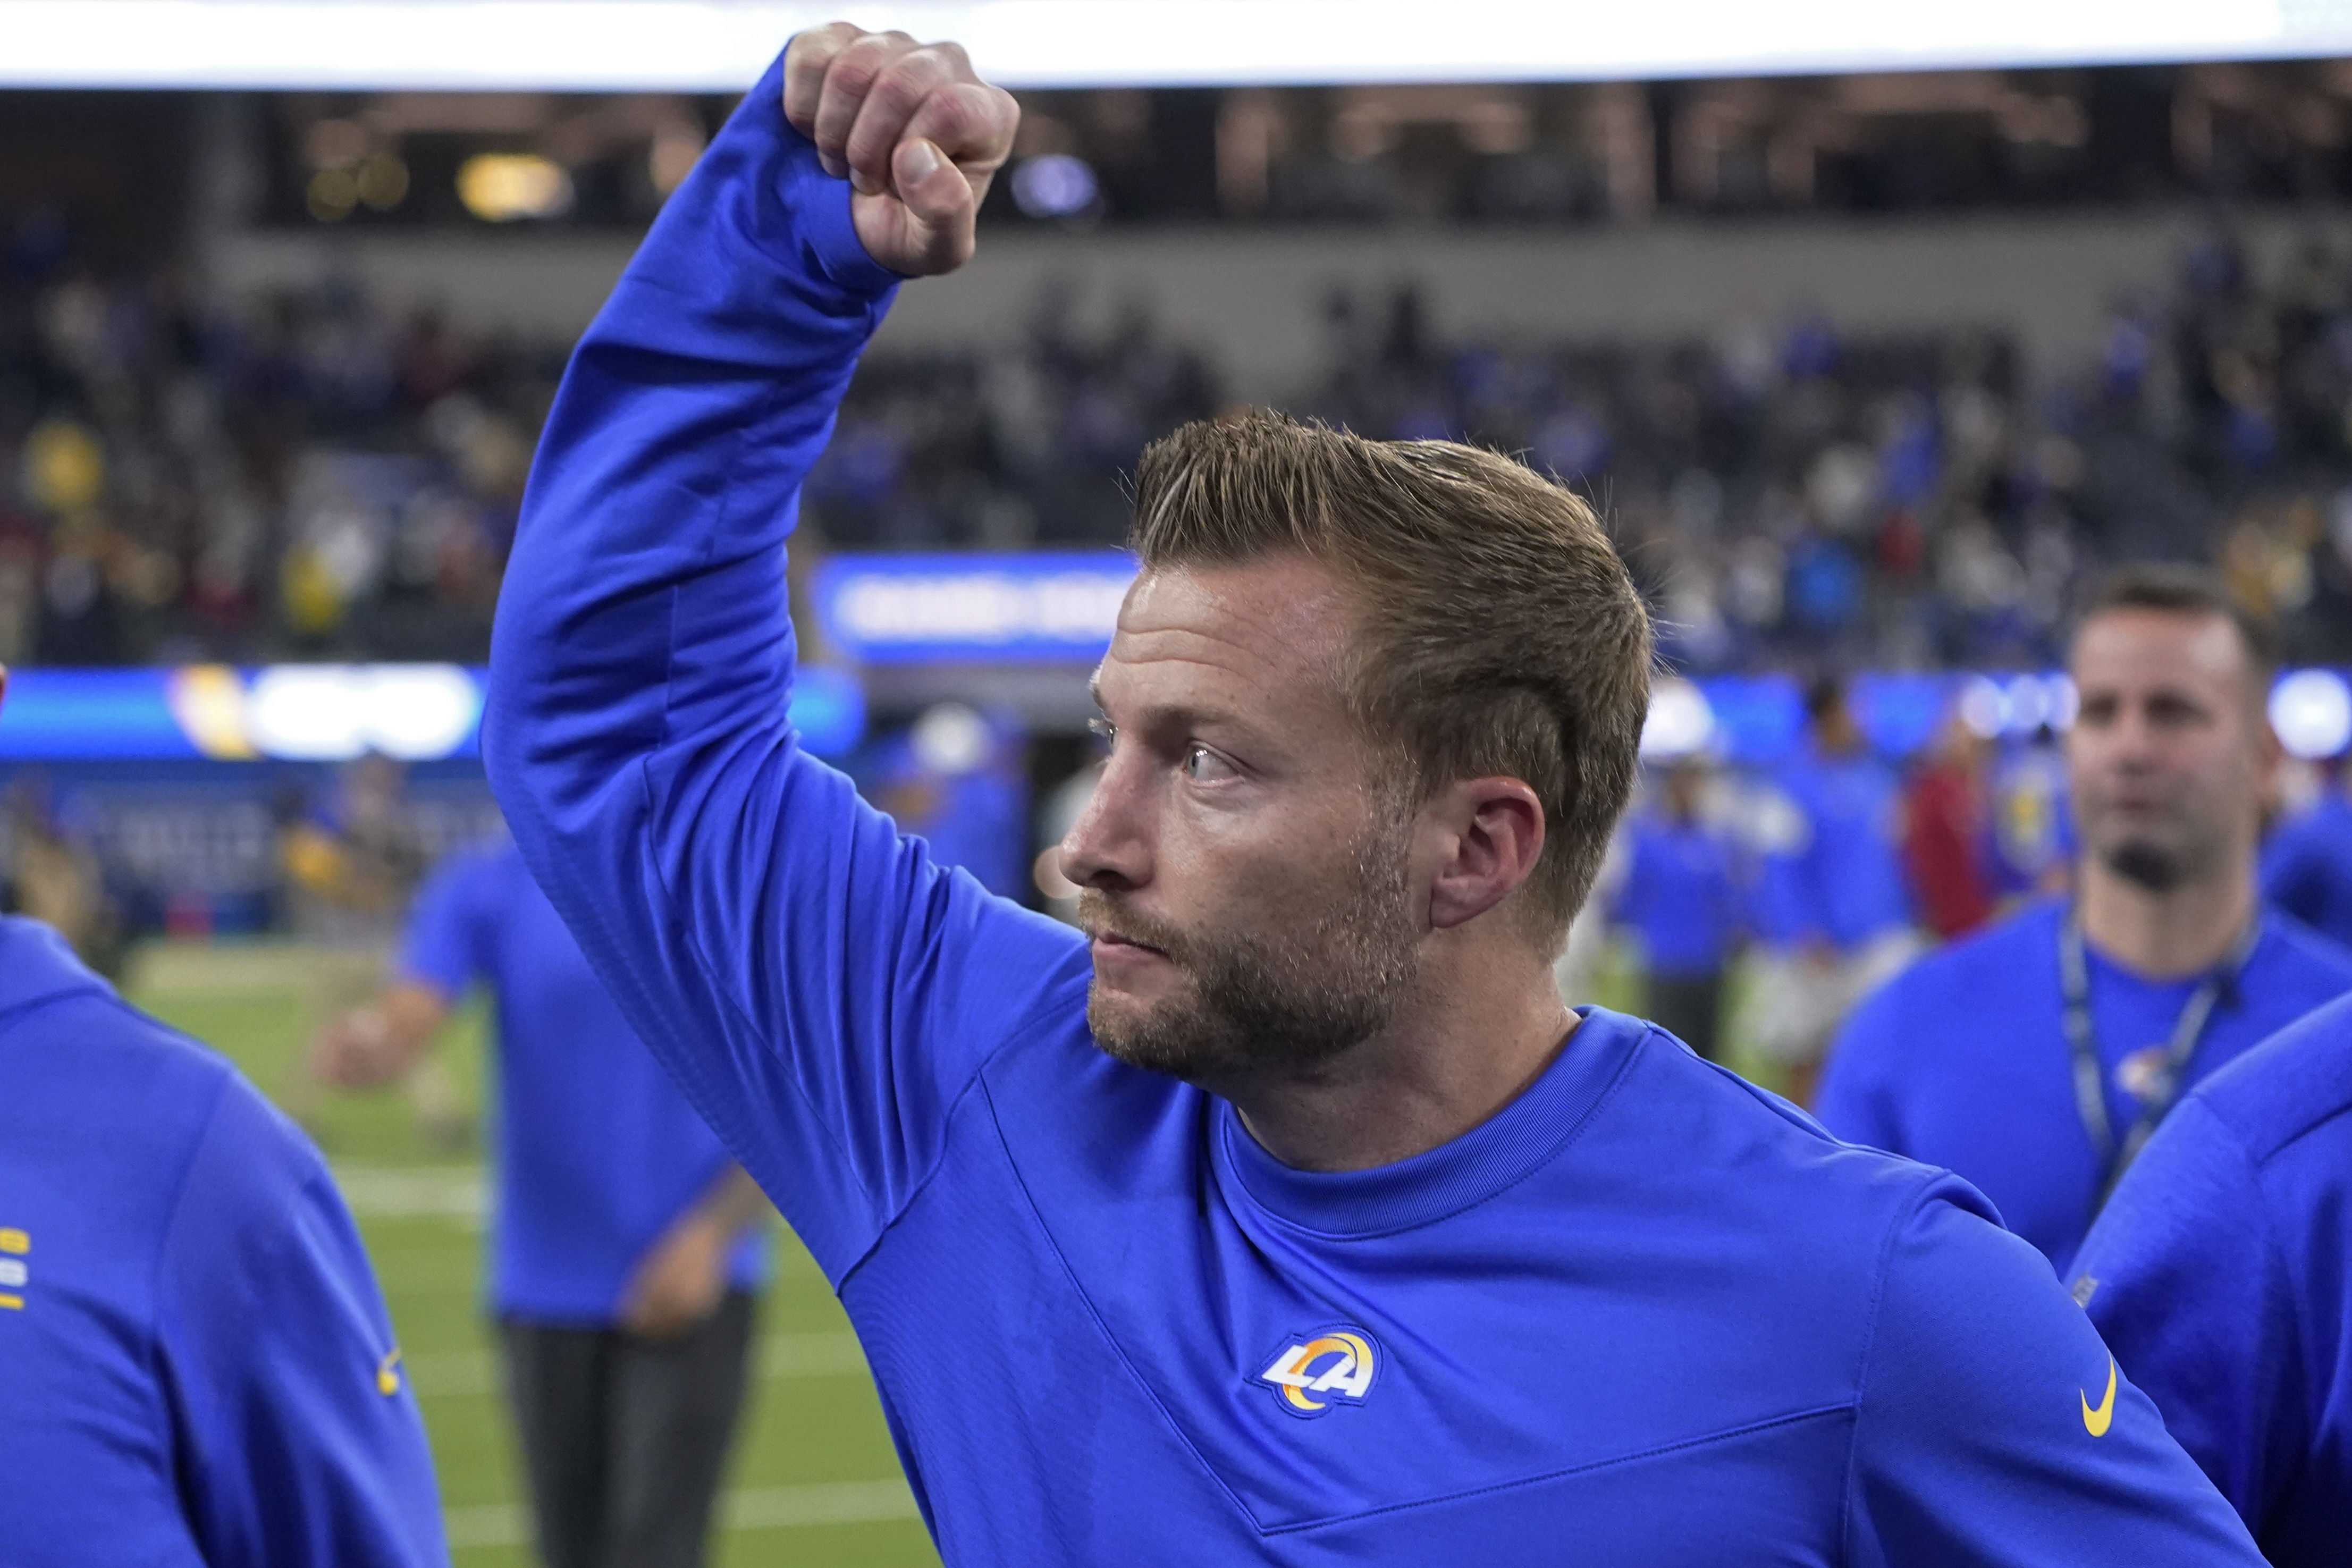 Sean McVay is 55-26 with four playoff wins as Rams coach.